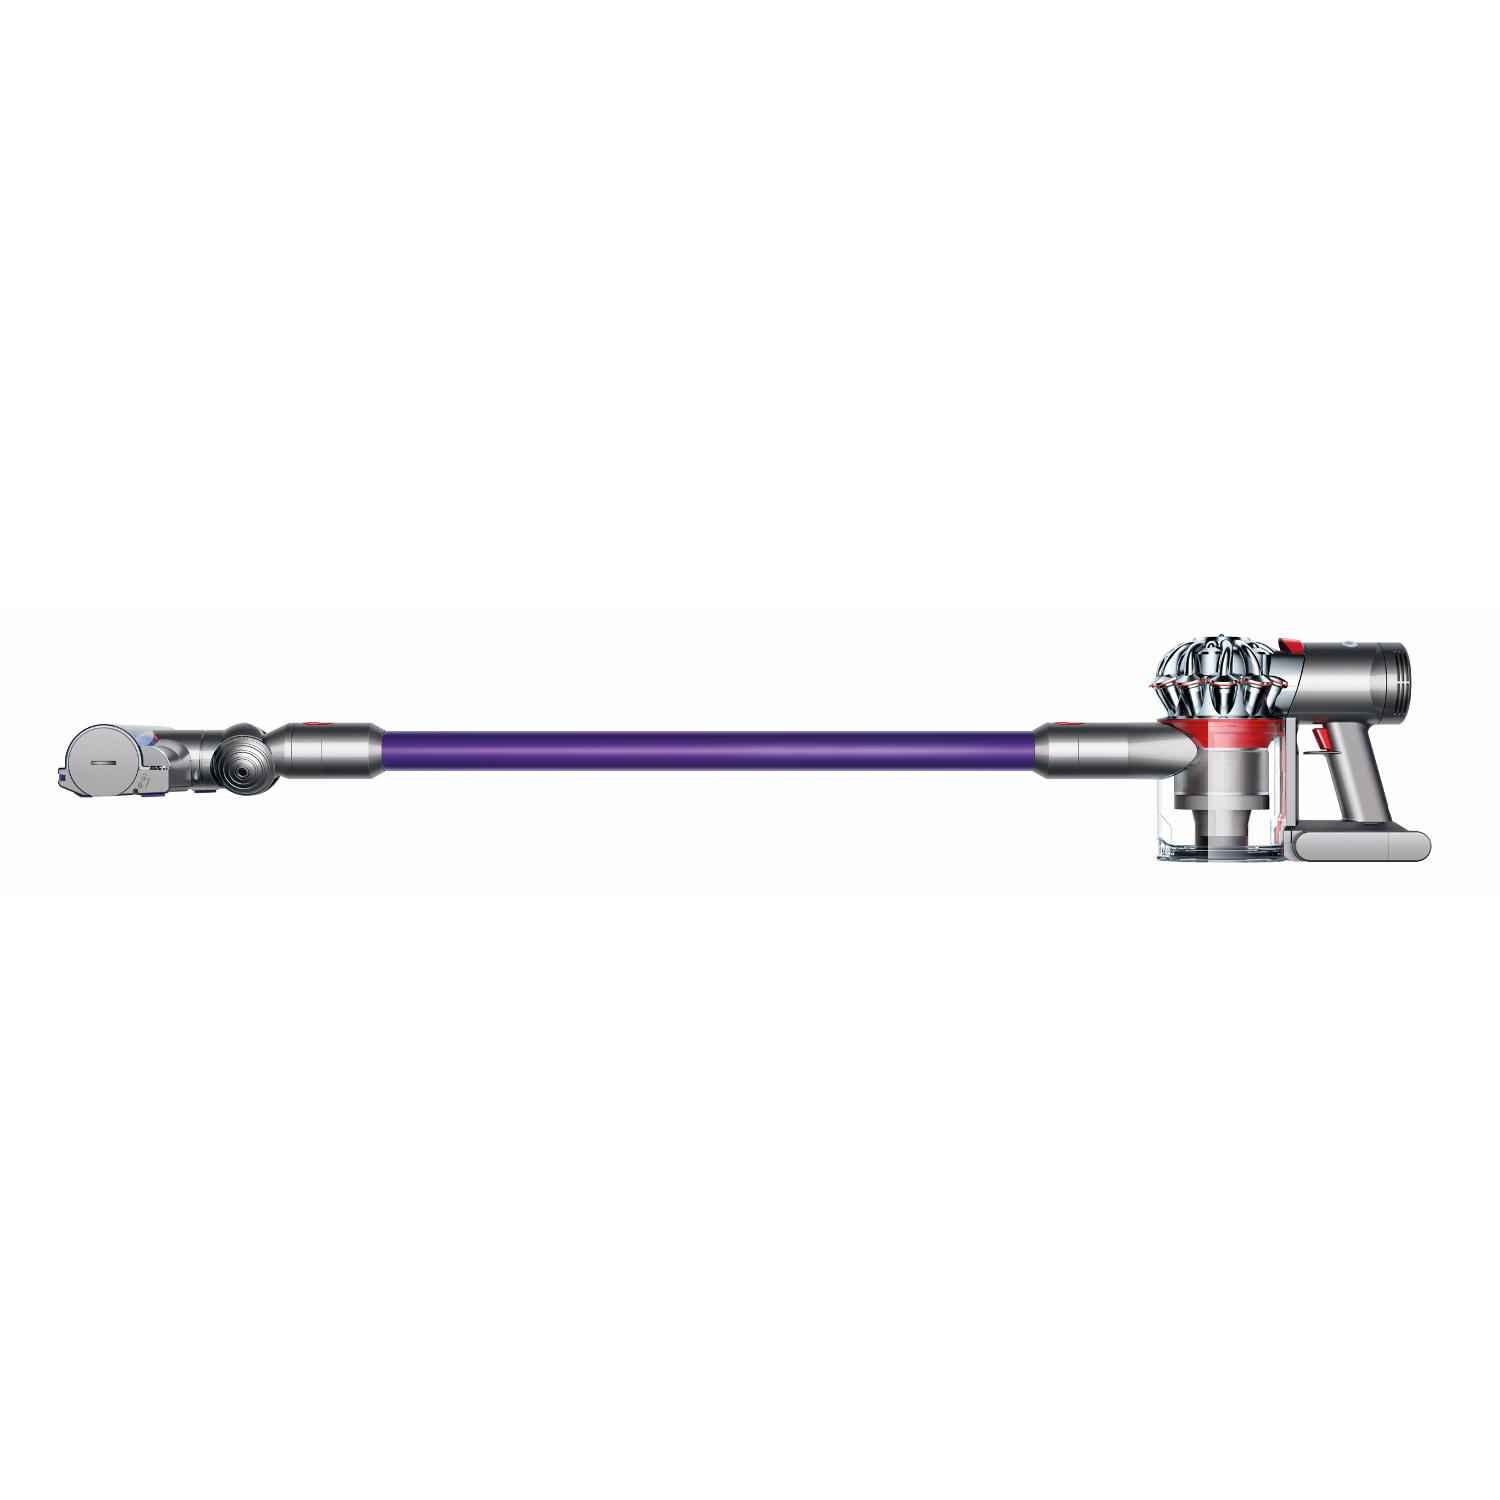 Dyson V7ANIMAL Cordless Vacuum Cleaner - 30 Minute Run Time - 2